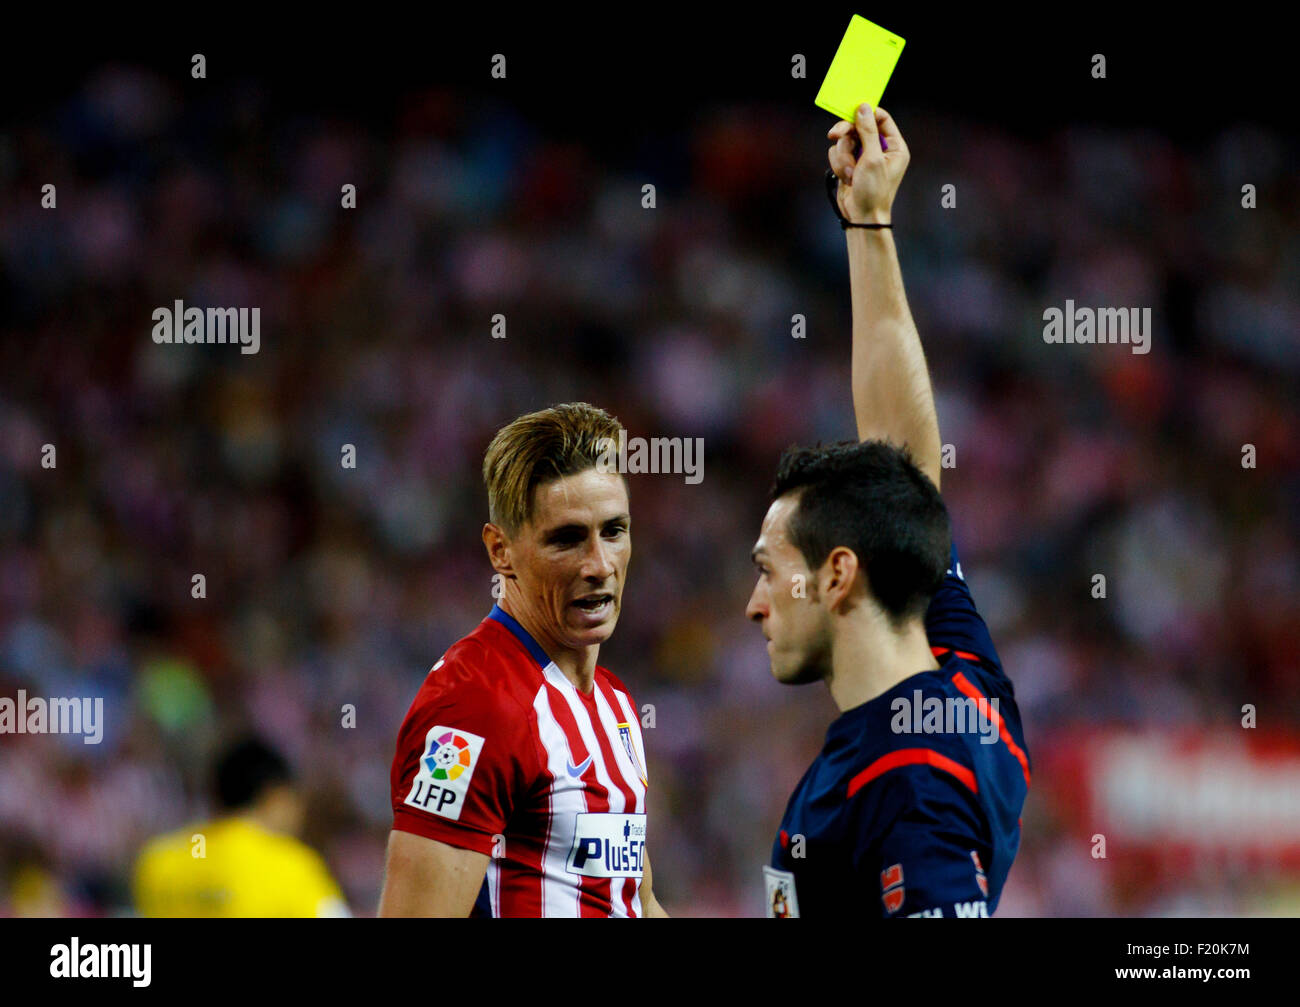 SPAIN, Madrid:Atletico de Madrid's Spanish forward Fernando Torres receives a yellow card during the Spanish League Stock Photo